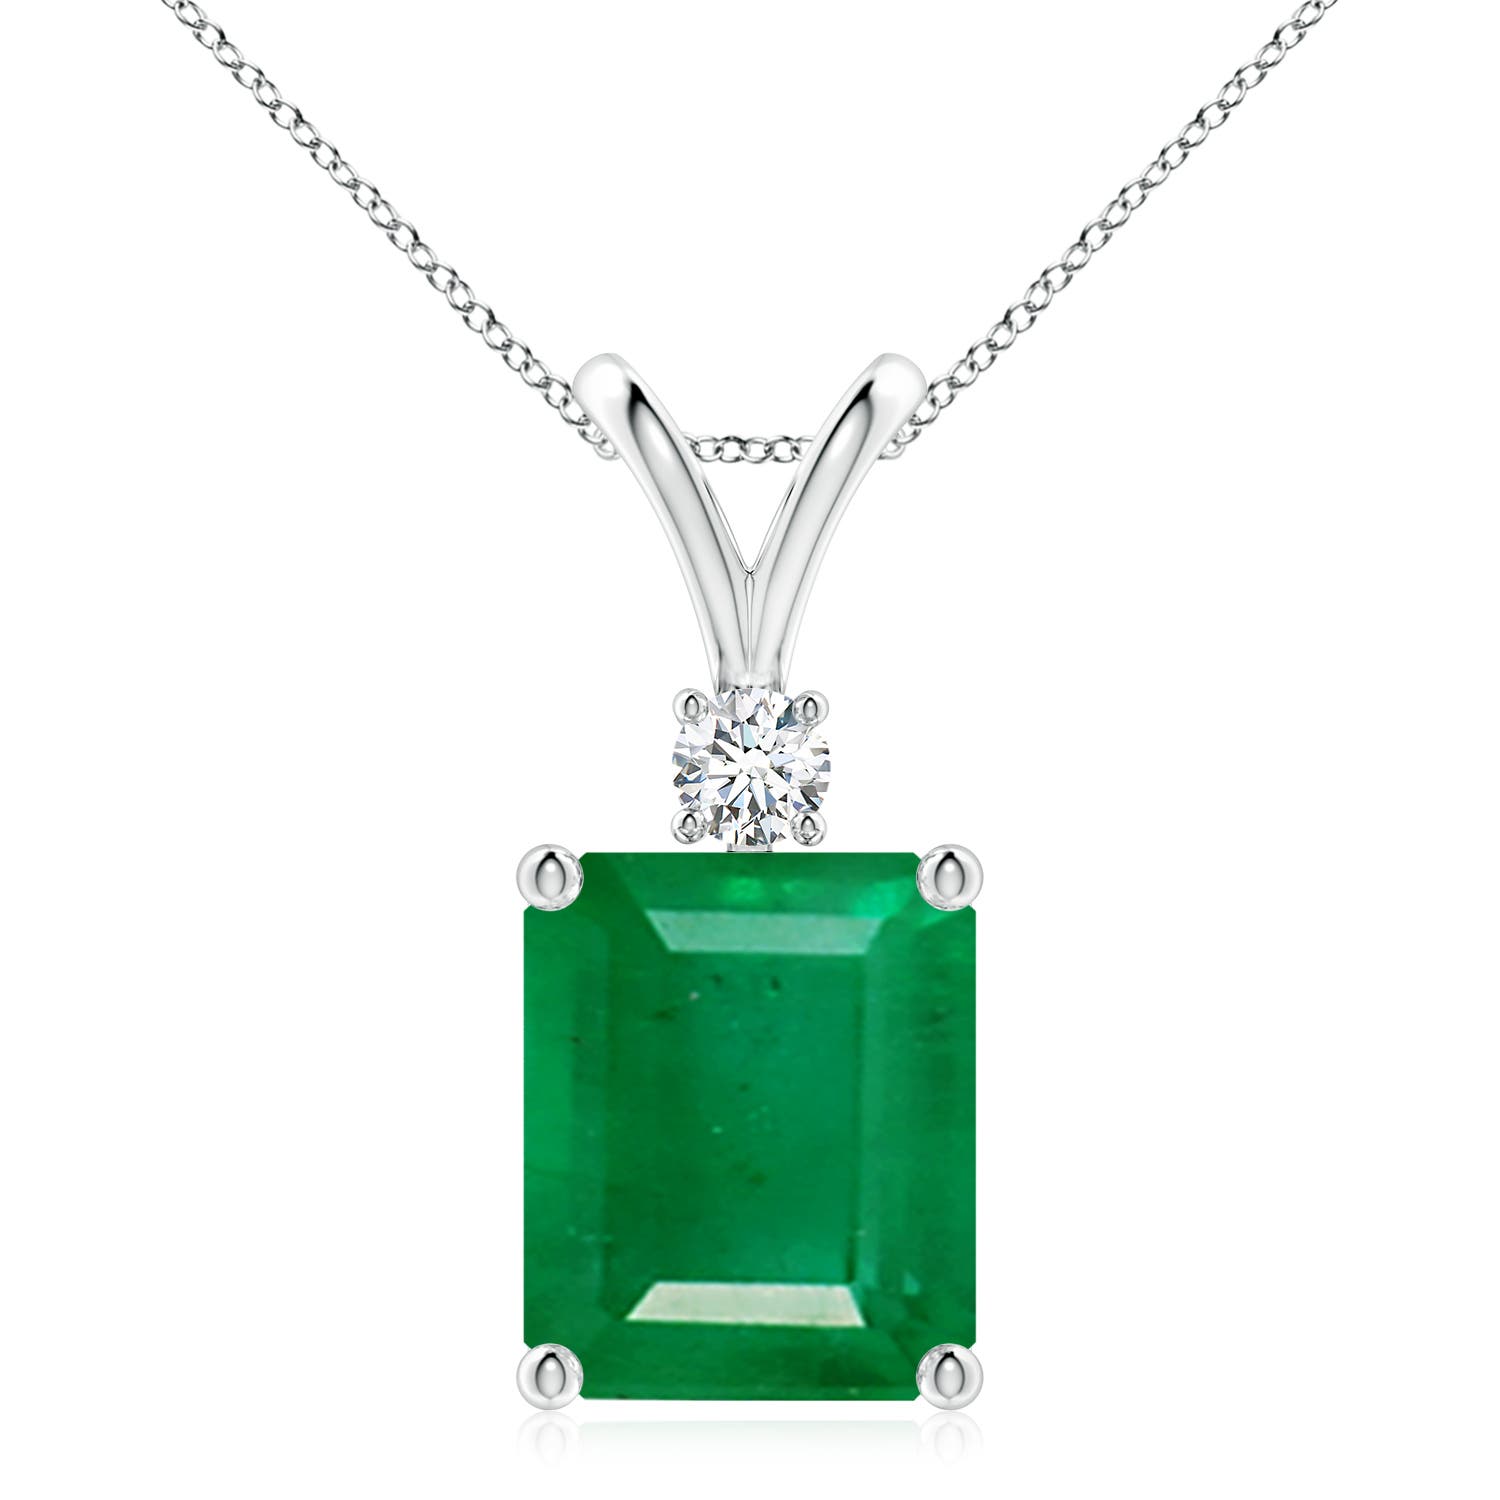 AA - Emerald / 5.91 CT / 14 KT White Gold